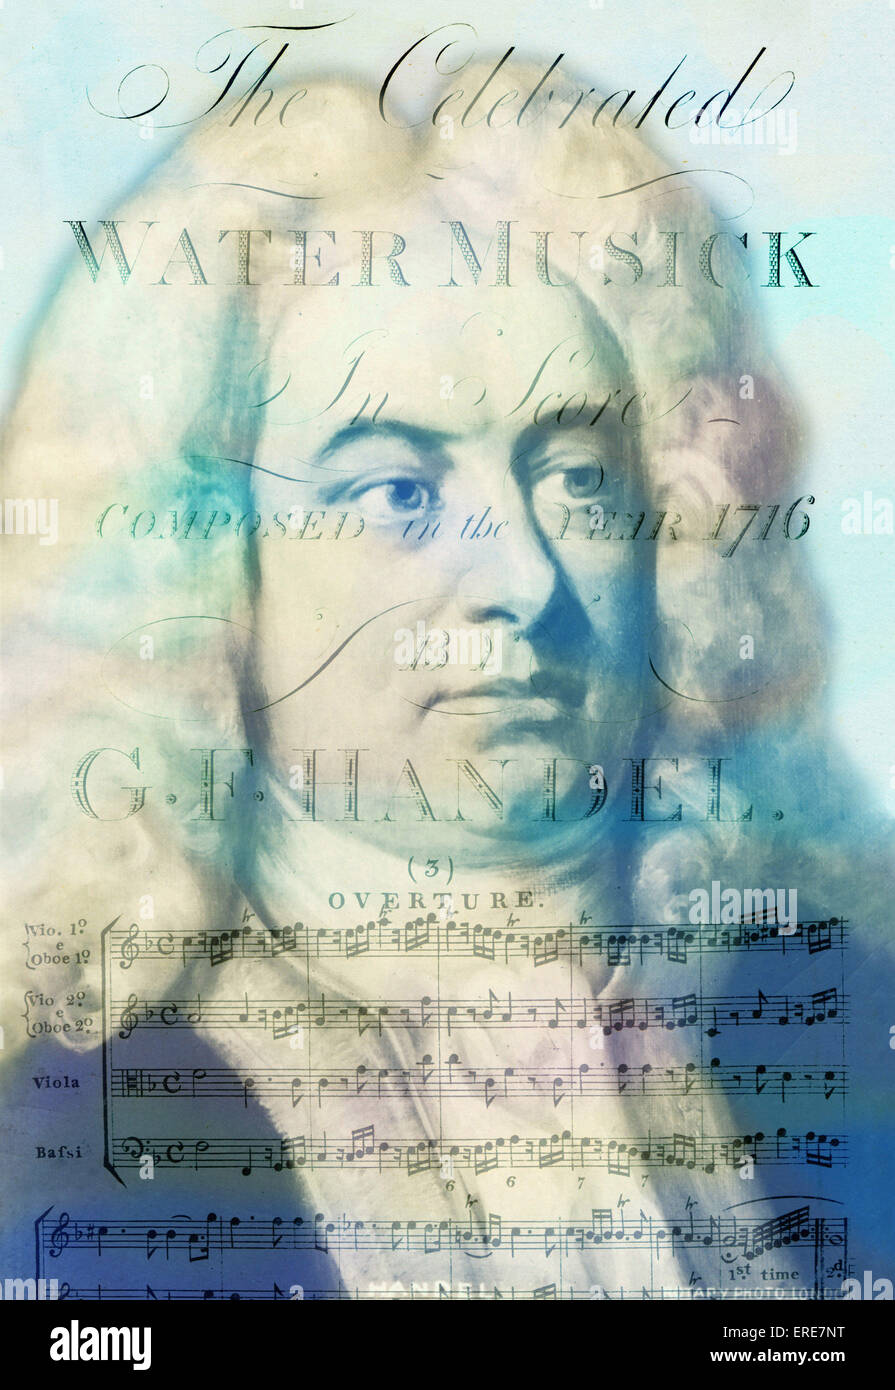 HANDEL, George Frideric collageor graphic compilation (cover ready to go). German-English composer, 23 February 1685 - 14 April Stock Photo